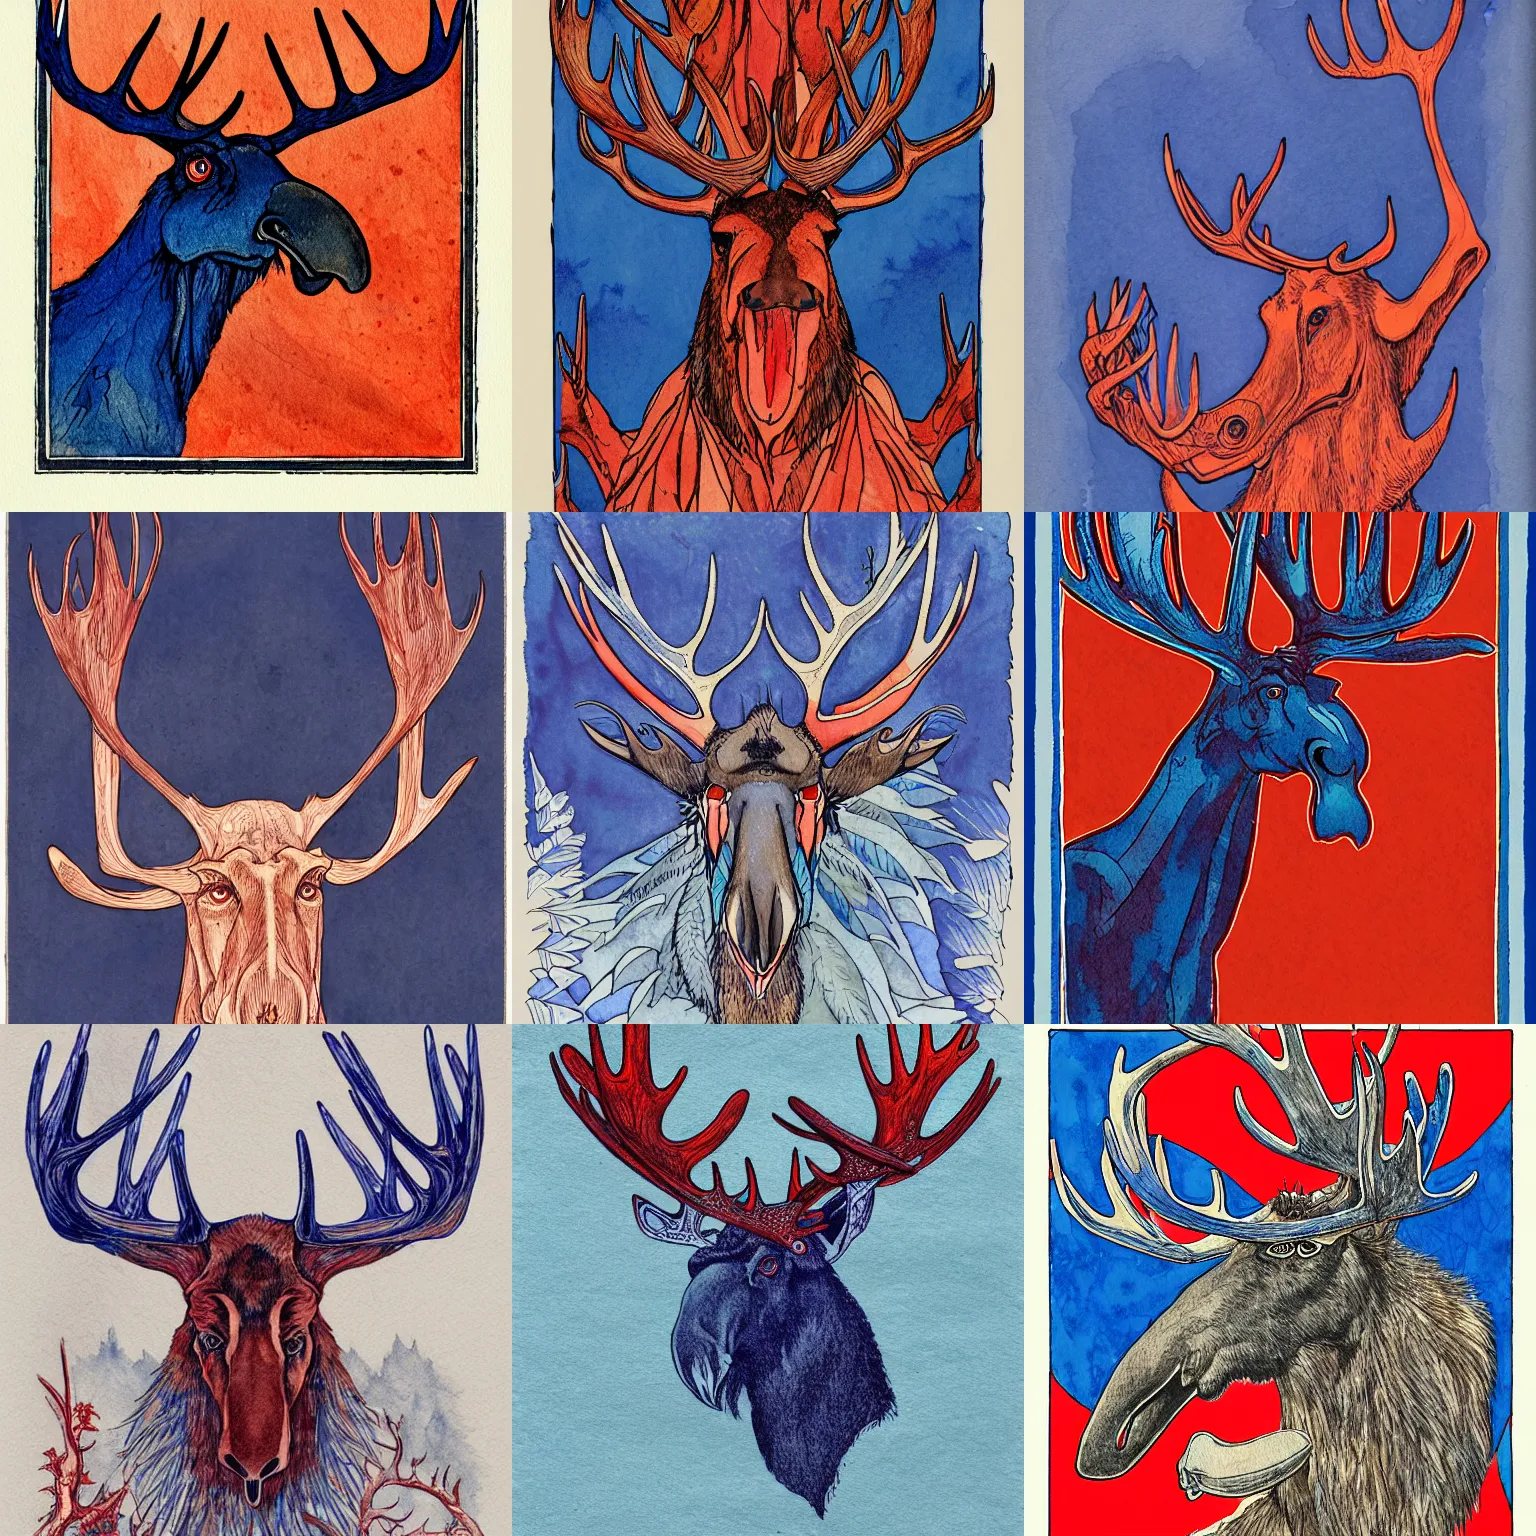 Prompt: turkey - moose creature with four arms and long neck, mandibles, graspers, pinchers, holding branches | romanticist, art nouveau illustration, loose linework, watercolor wash over inks, cadmium red, cobalt blue, payne's grey, luminism